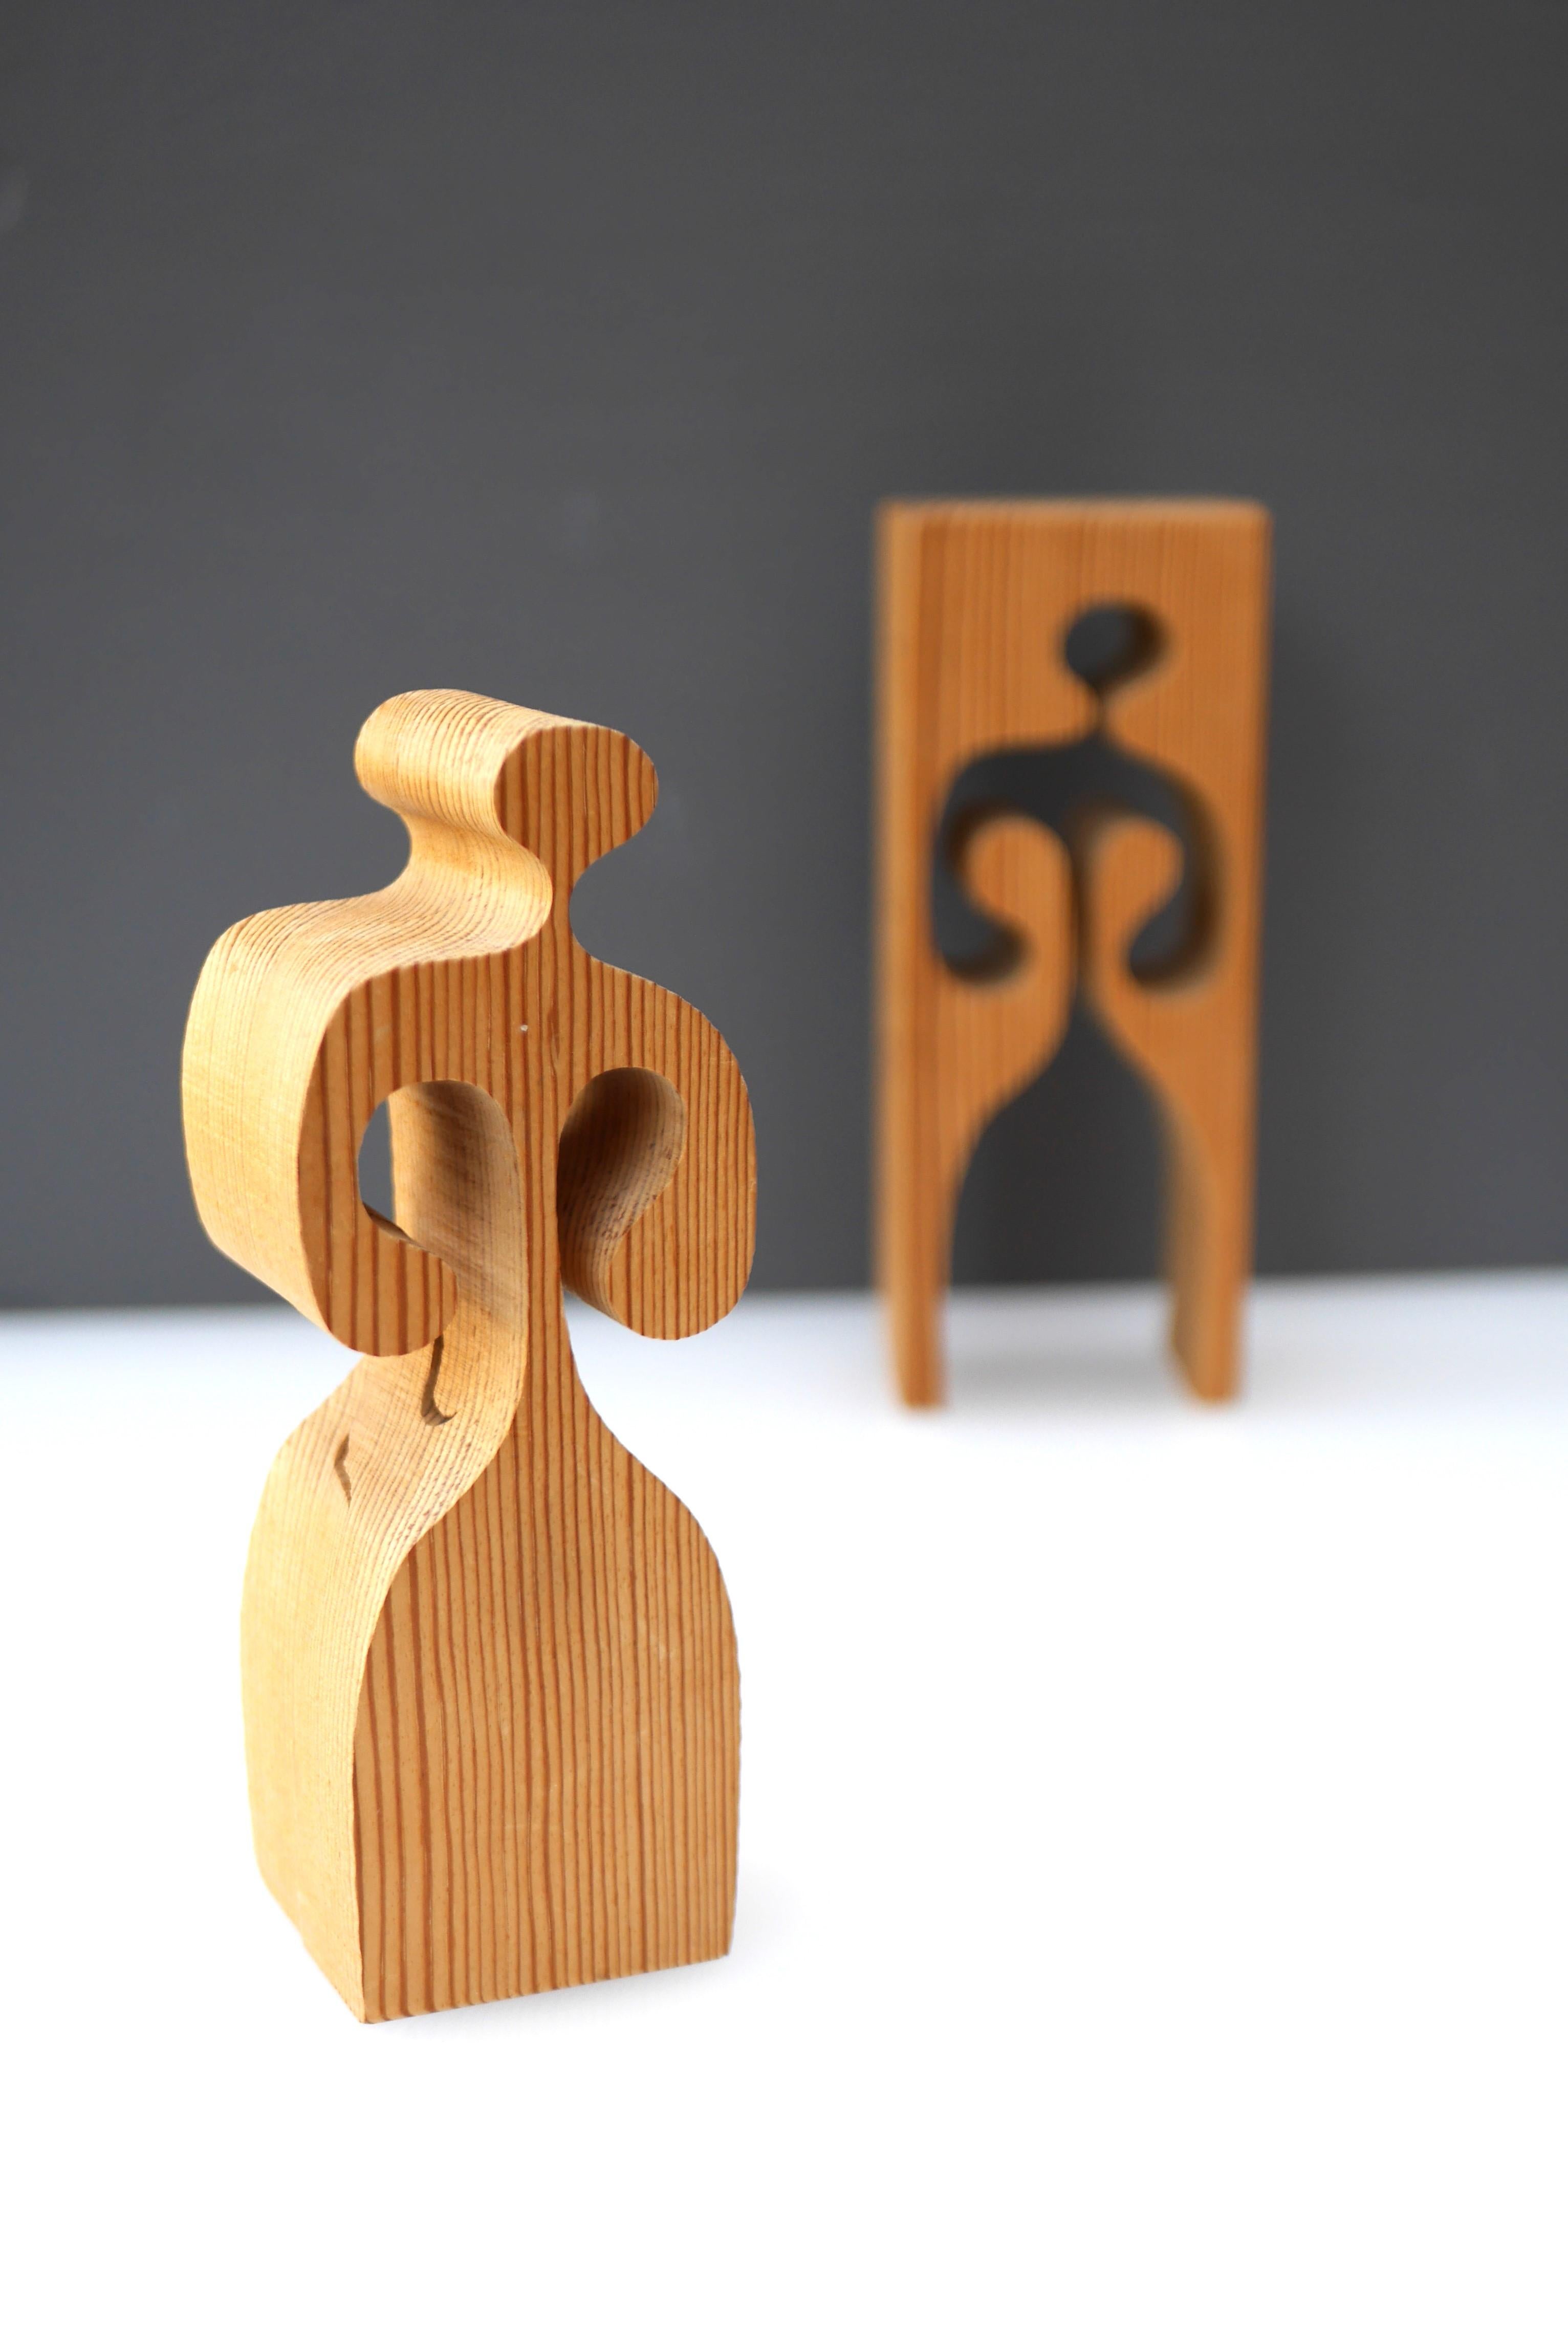 Mid-20th Century Wooden Puzzle Sculpture by Gunnar Kanevad for Gamla Linköping Sweden, 1962 For Sale